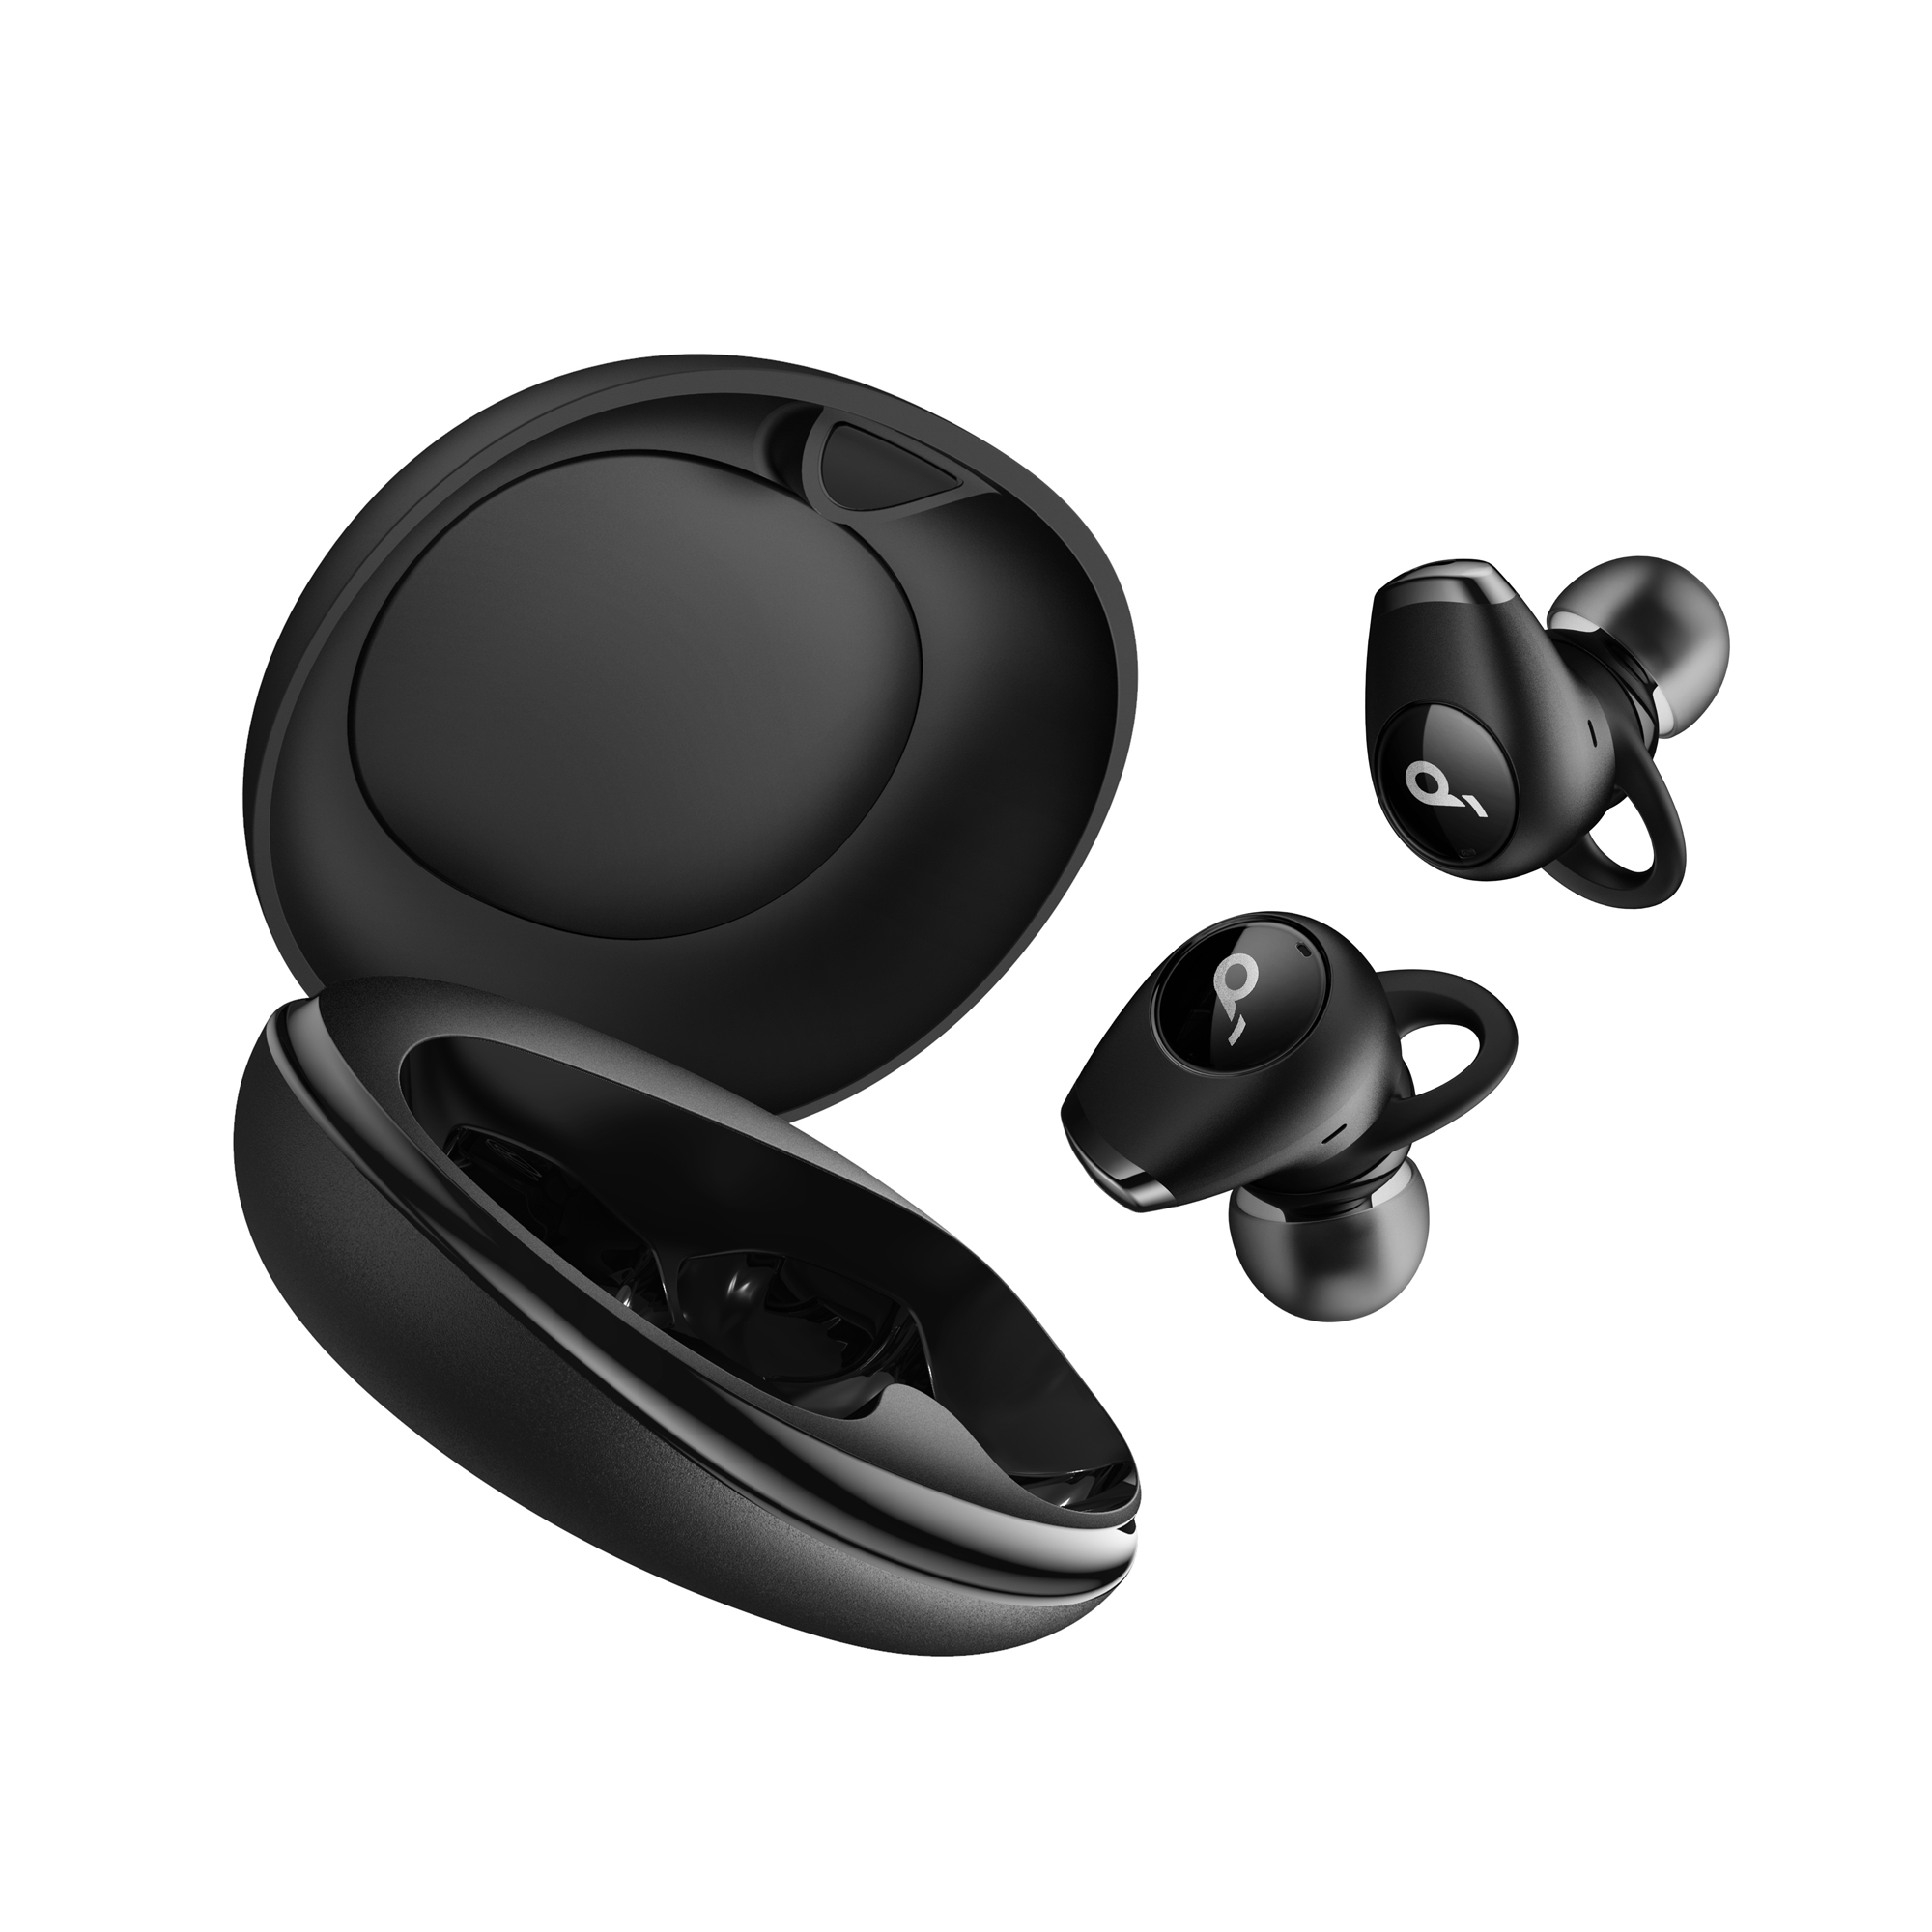 Soundcore by Anker announced Life Dot2 ANC with Hybrid Active noise cancellation, priced for Rs. 7,999/-